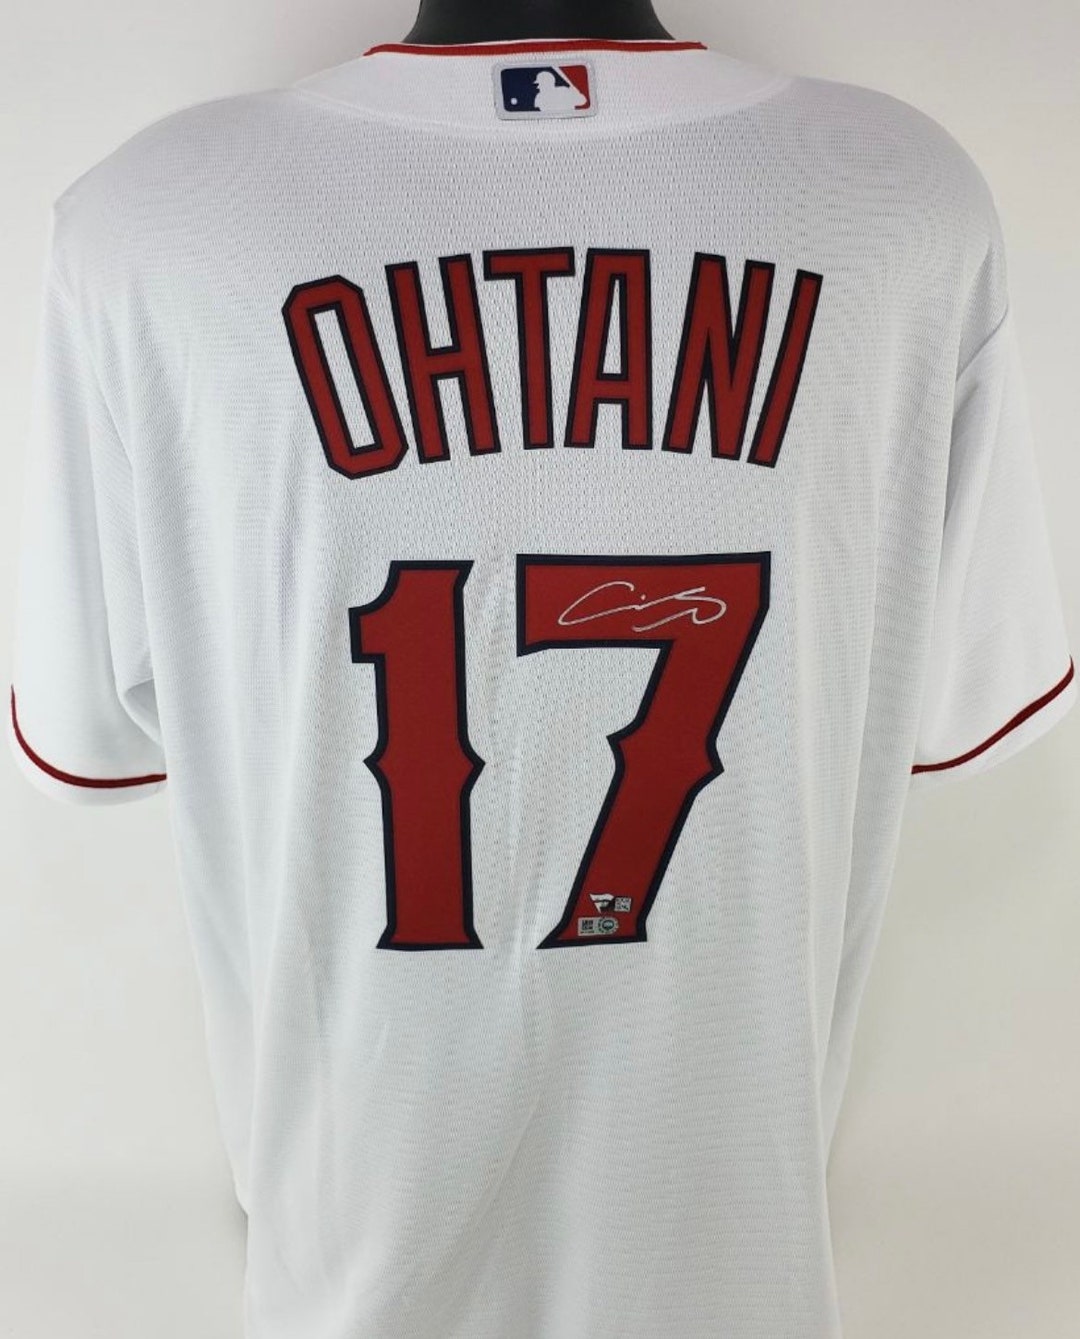 Autographed Los Angeles Angels Shohei Ohtani Fanatics Authentic Majestic  Red Authentic Jersey